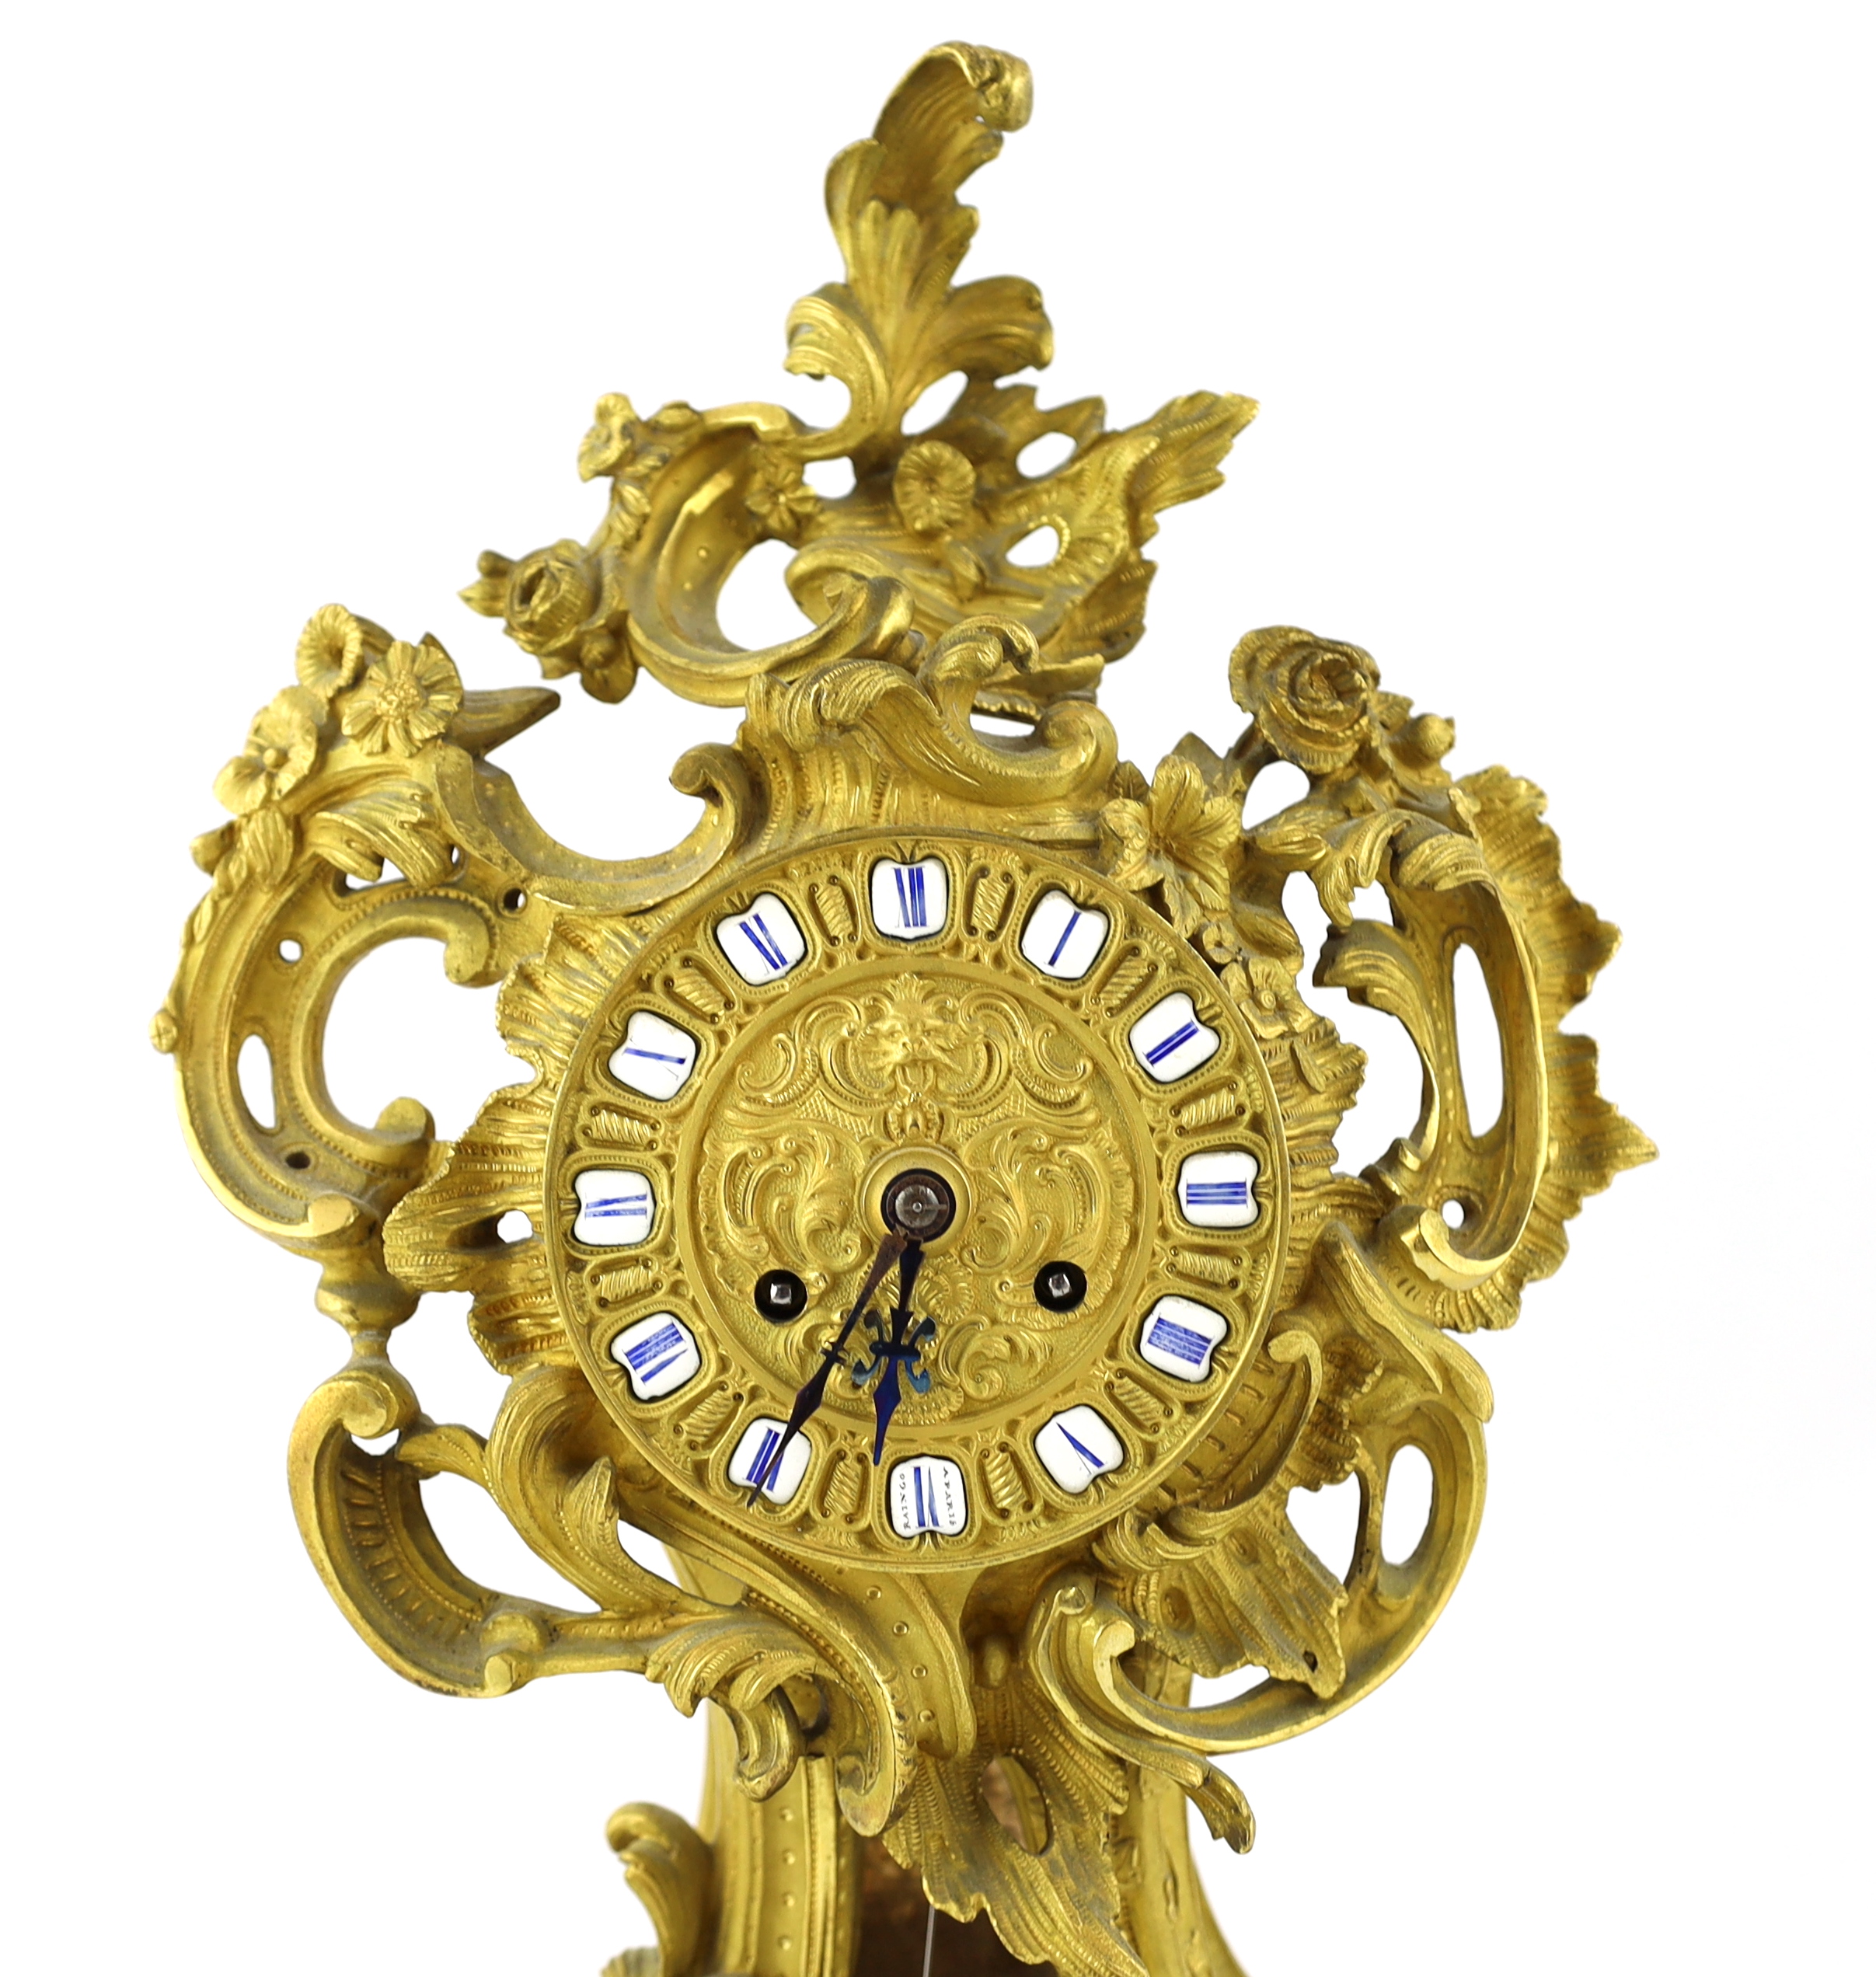 A 19th century French ormolu mantel clock, of asymmetrical scroll form, with enamelled tablet - Image 2 of 5